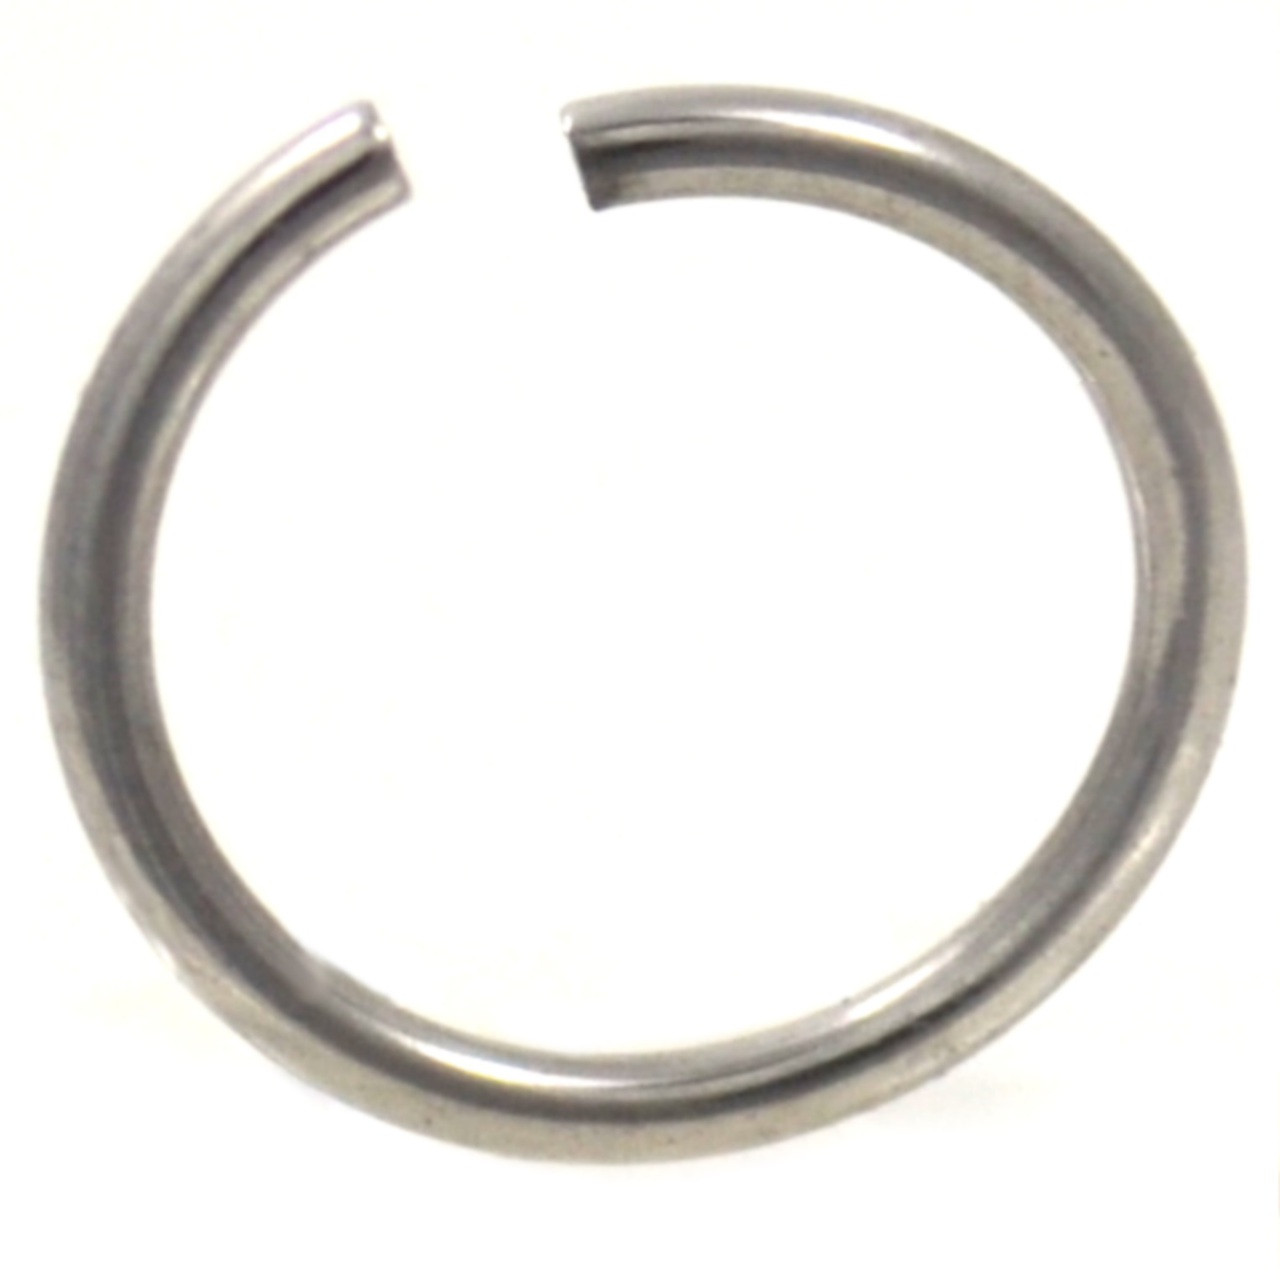 Stainless Steel Bendable Nose Ring Hoop 